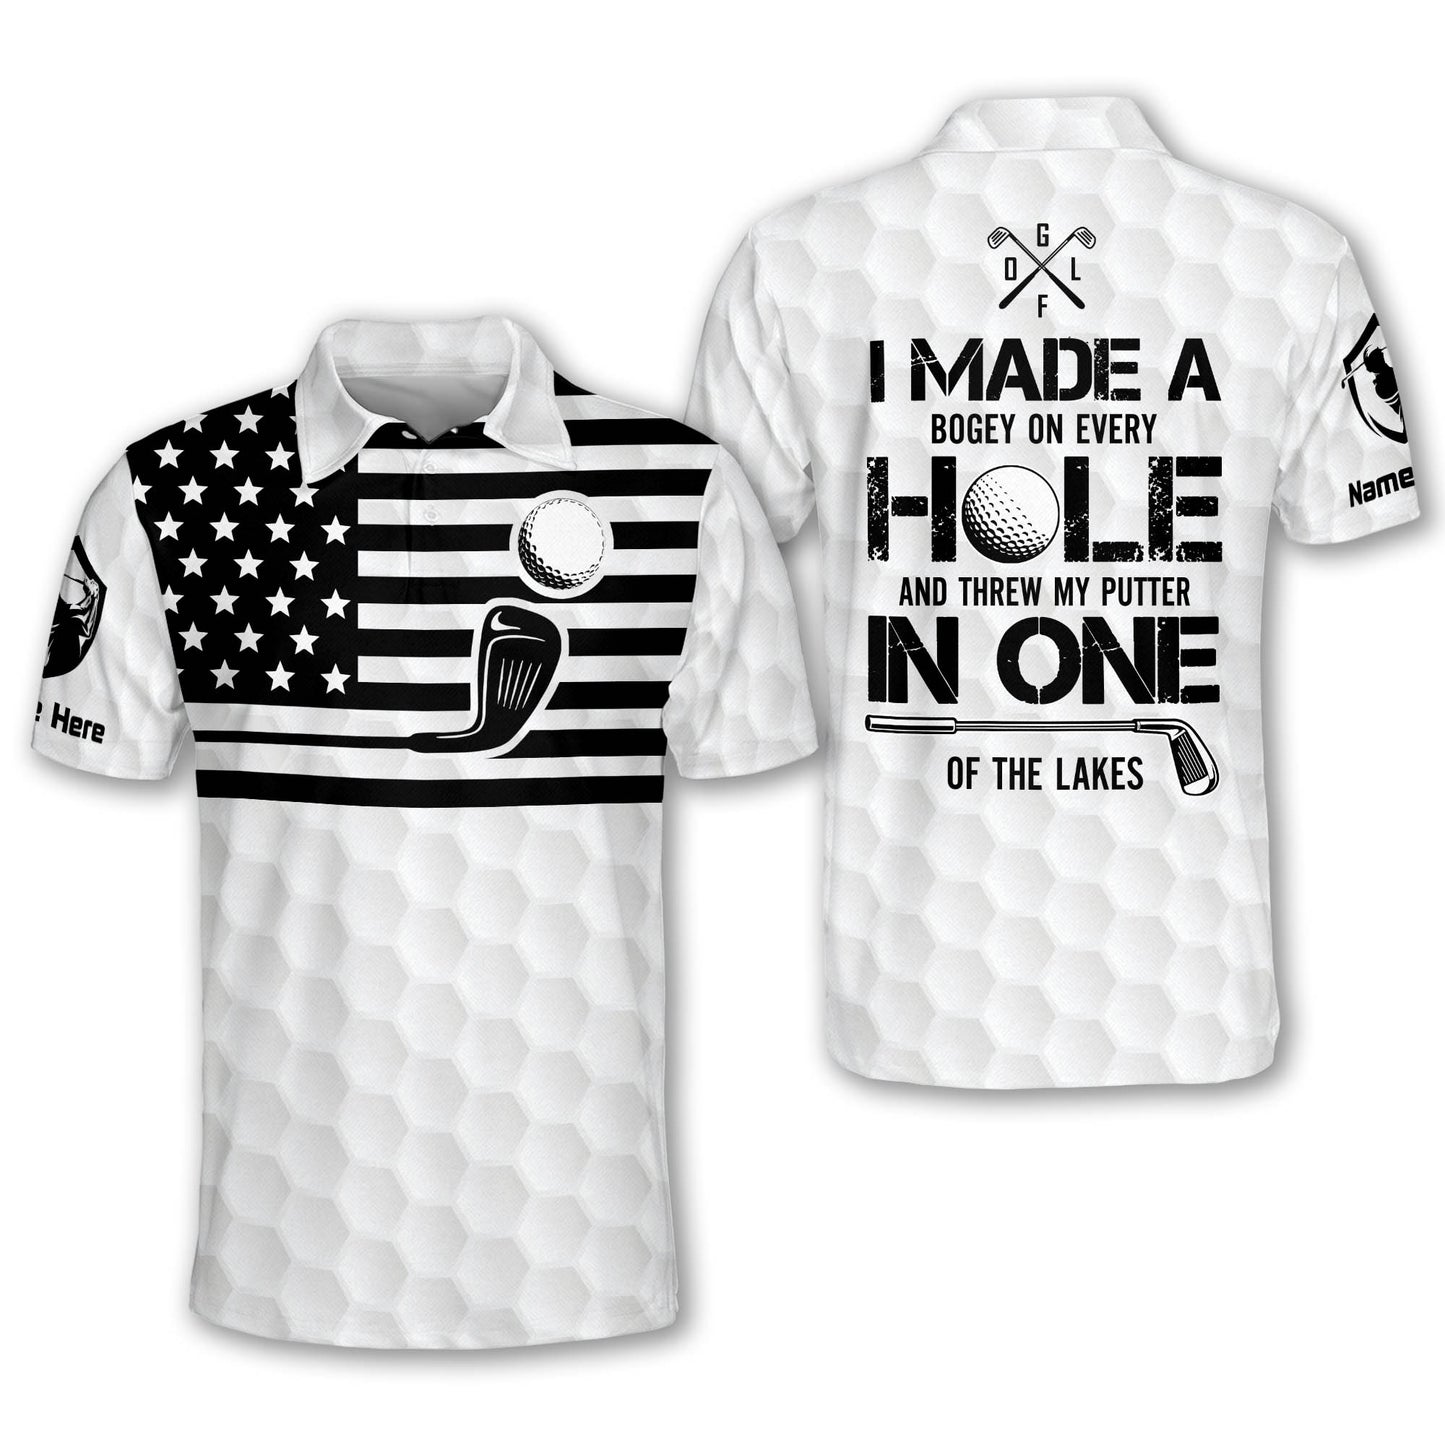 I Made A Hole In One Men's Golf Polos GM0077